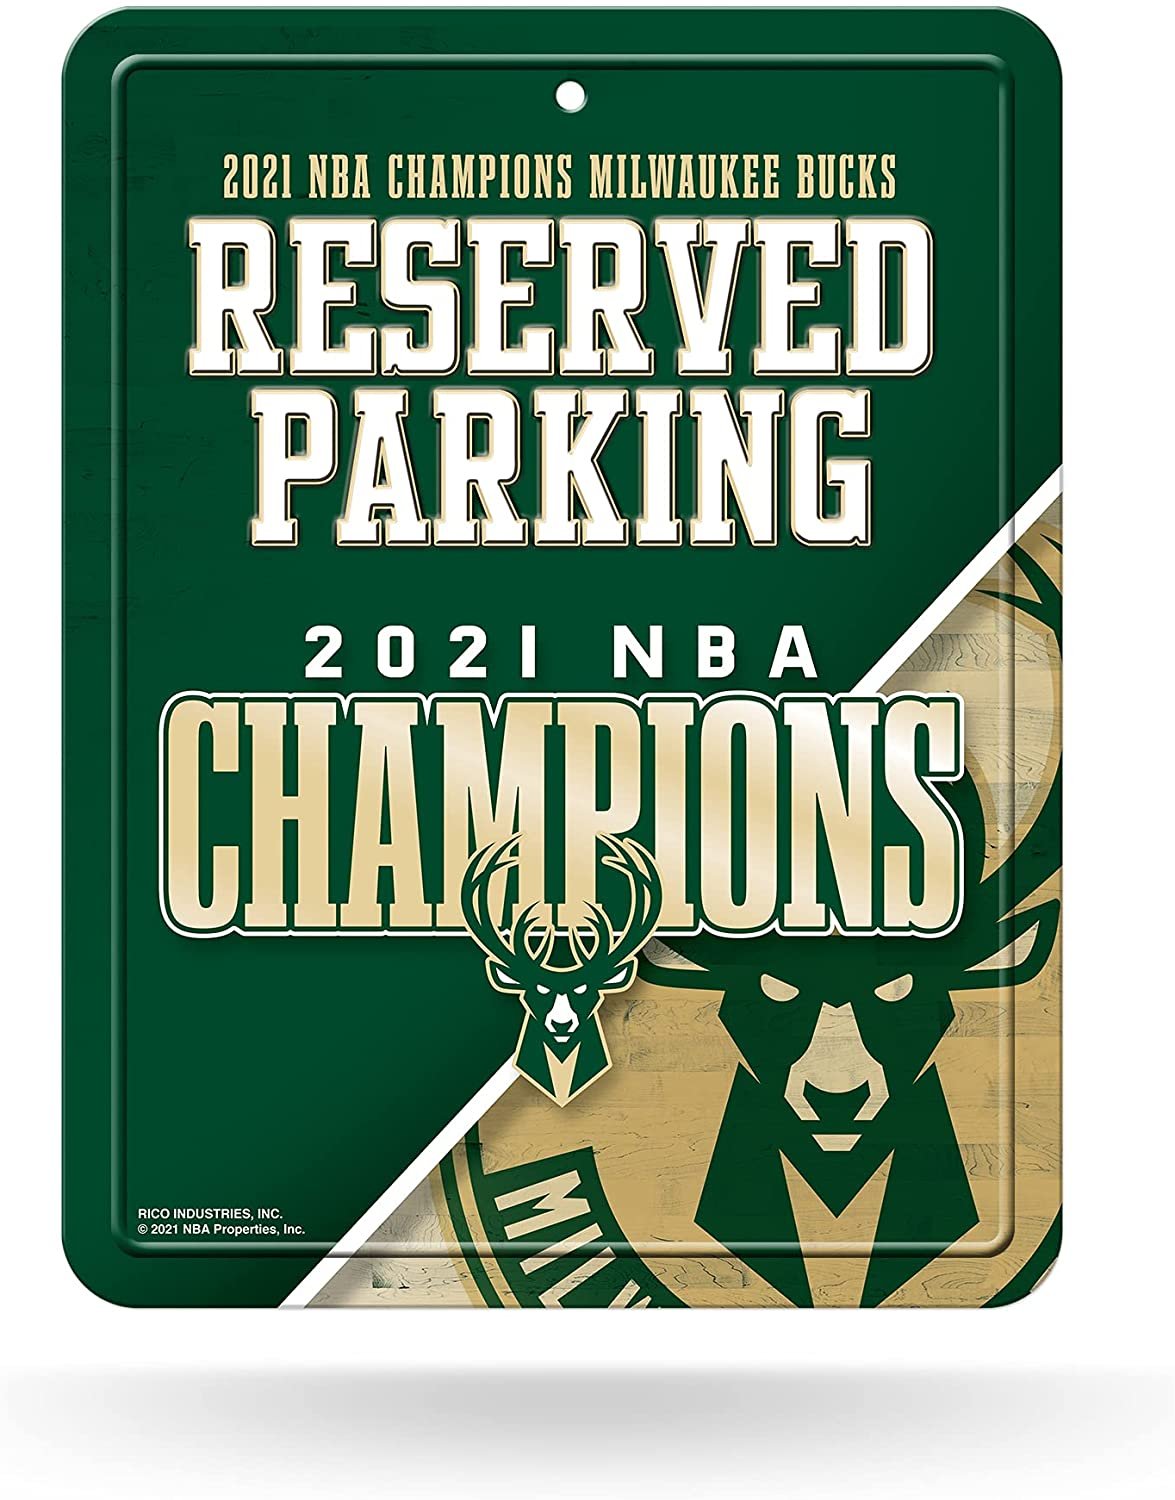 Milwaukee Bucks 2021 Basketball Champions 8.5-Inch by 11-Inch Metal Parking Sign Décor